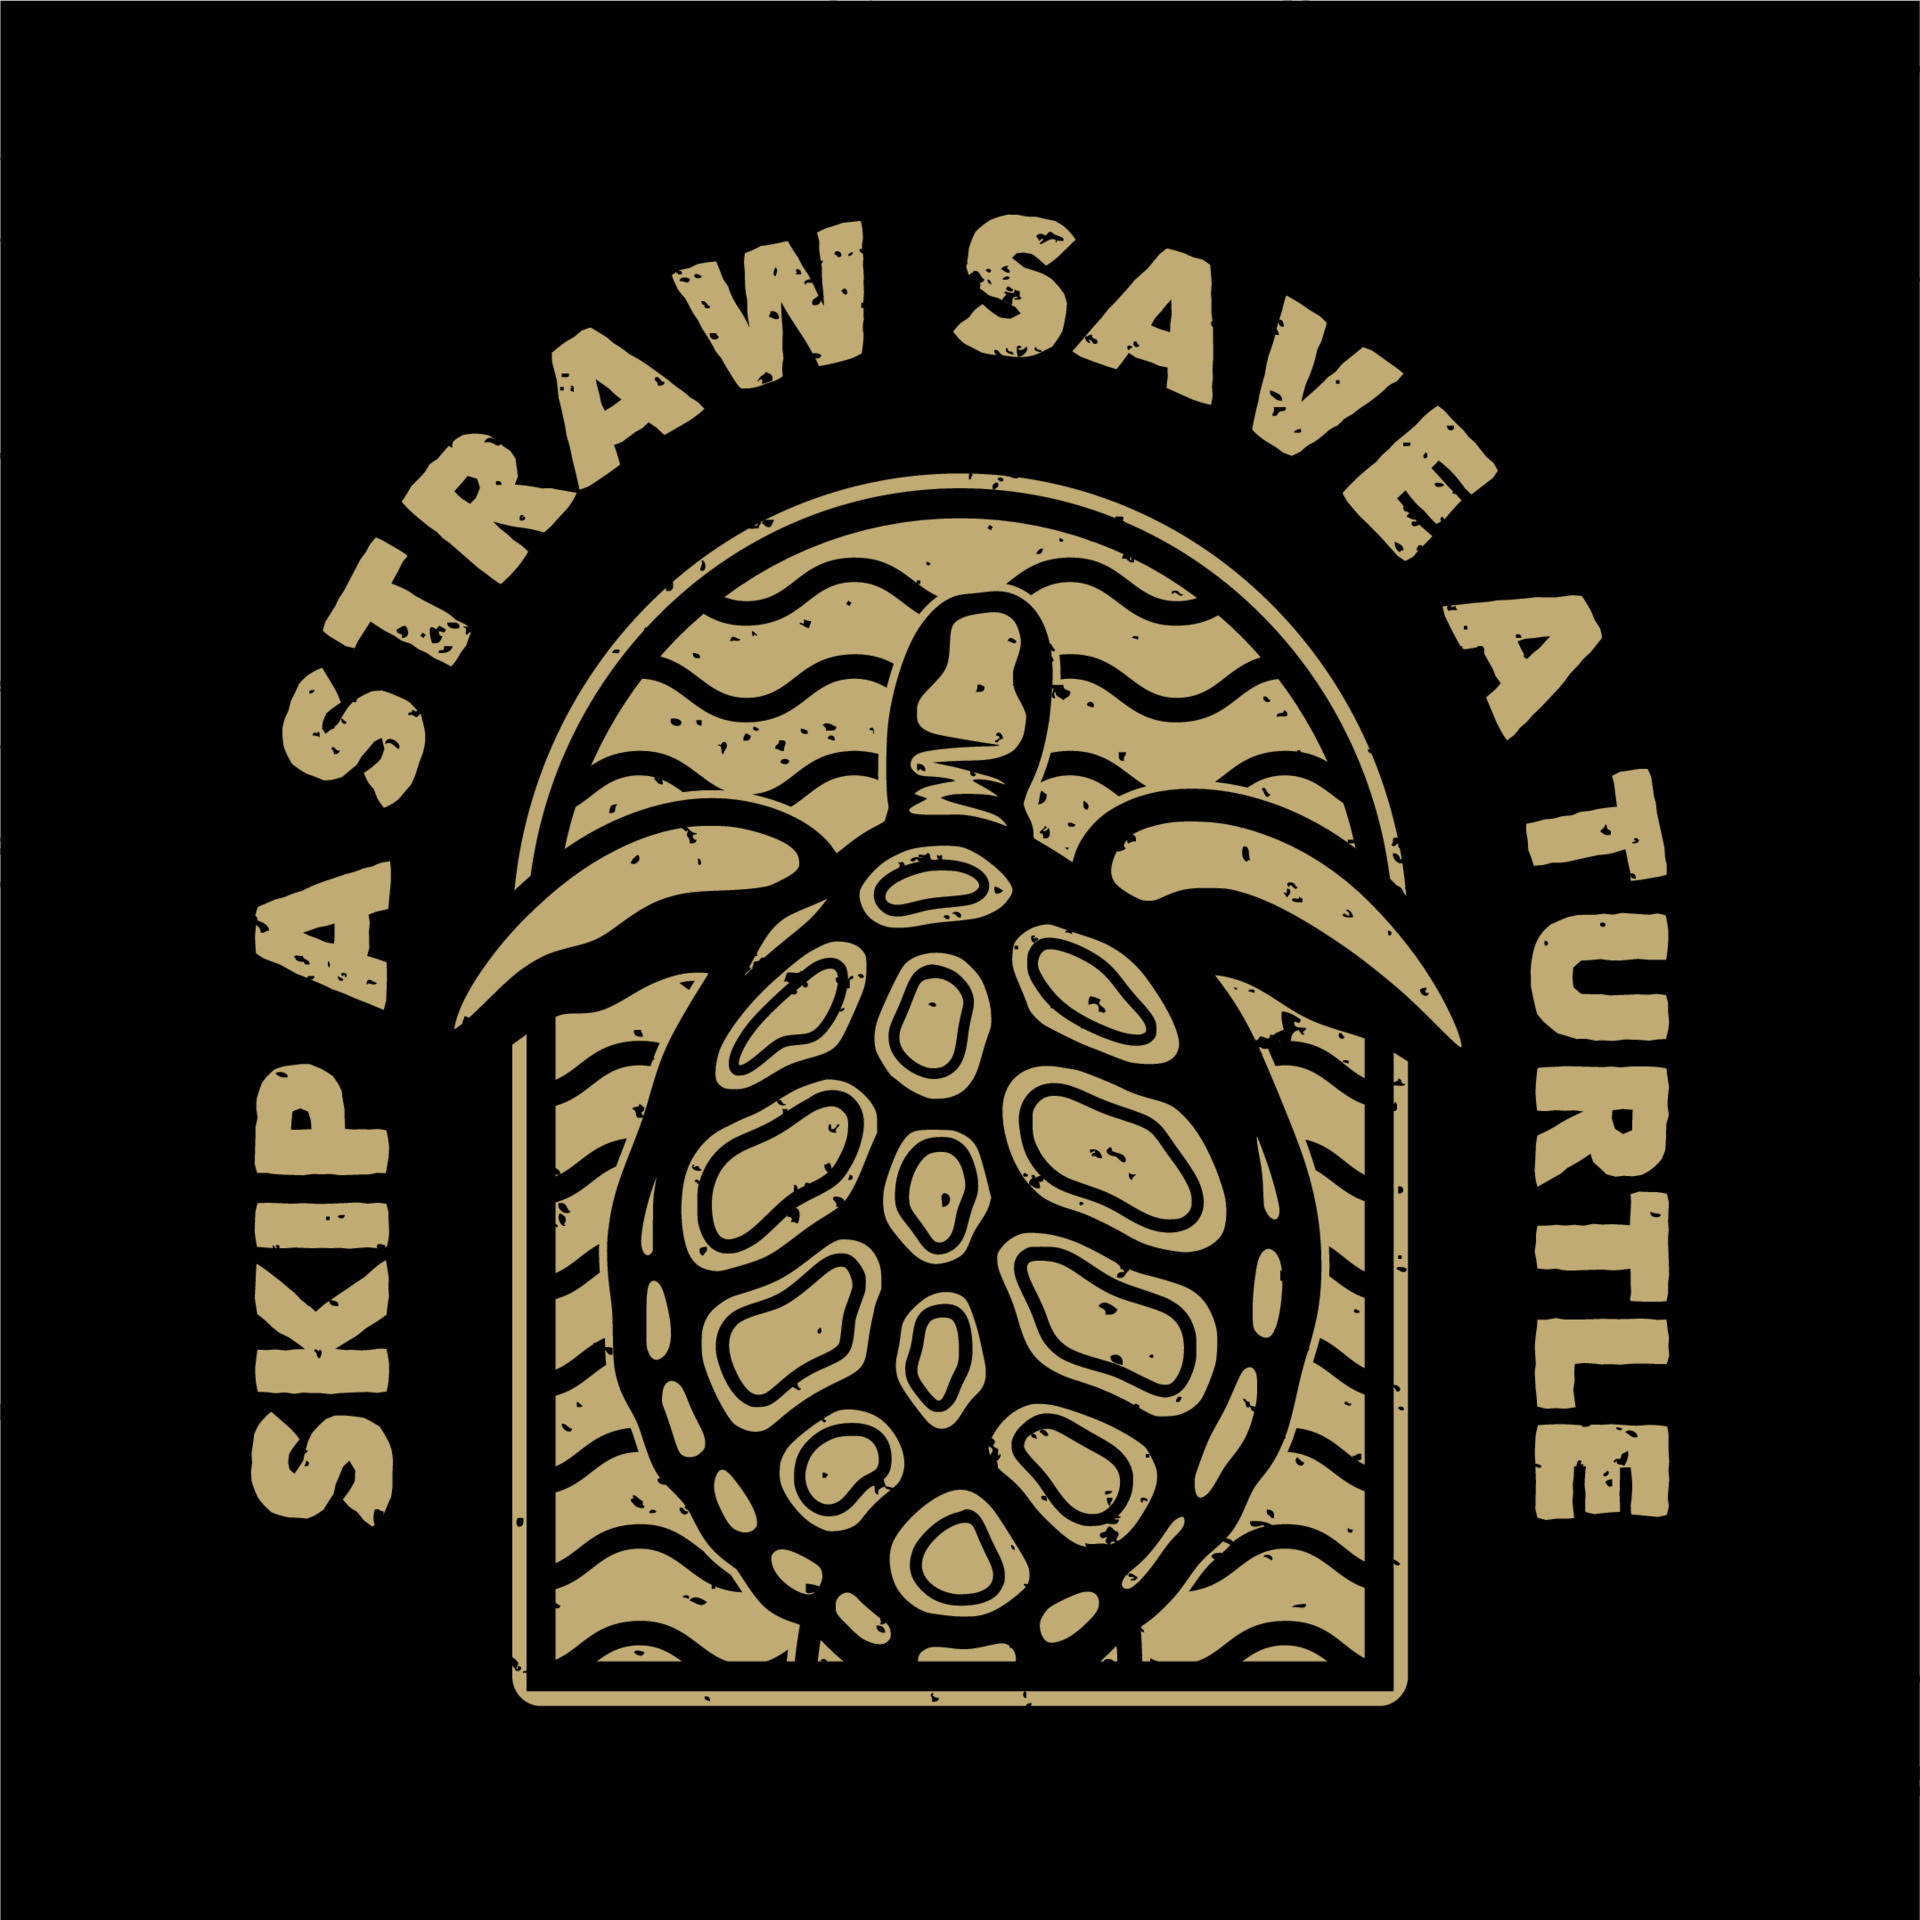 https://static.vecteezy.com/system/resources/previews/004/540/263/original/vintage-slogan-typography-skip-a-straw-save-a-turtle-for-t-shirt-design-vector.jpg